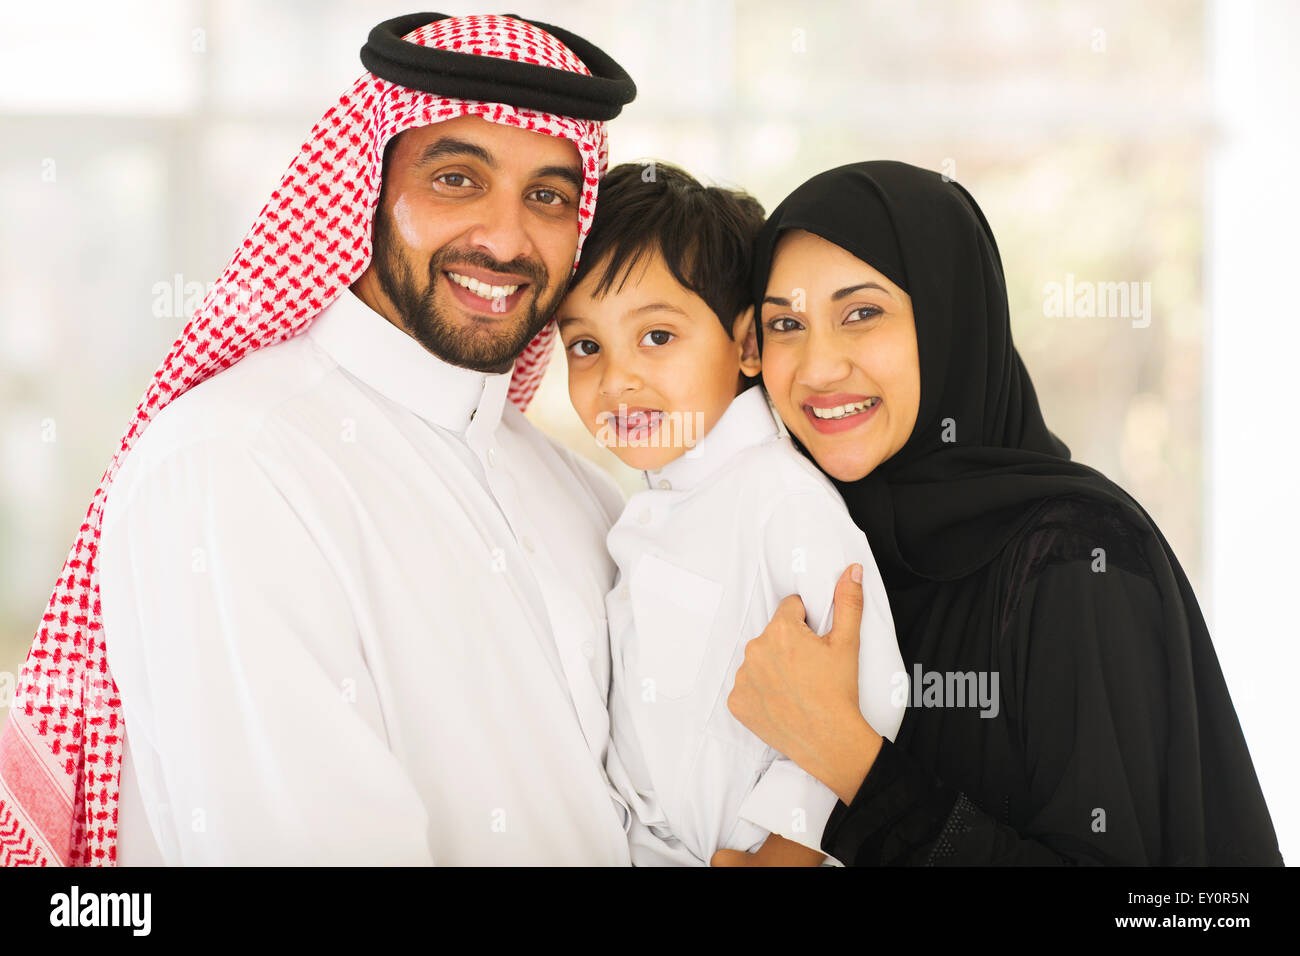 portrait of happy middle eastern family Stock Photo